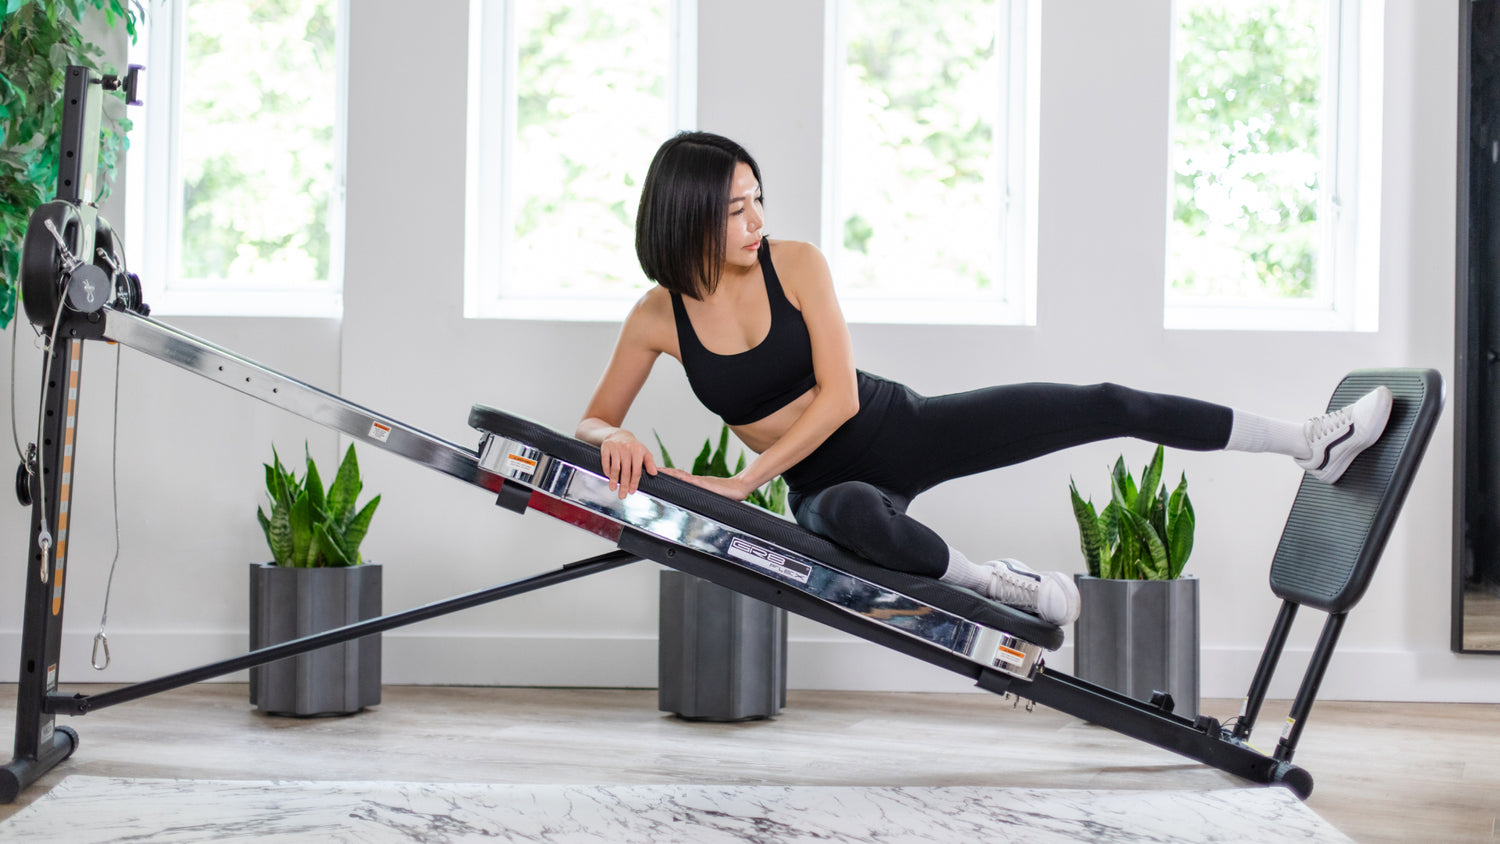 Diet and Fitness Resources - Shop for weight loss and home fitness  equipment - Body Sculpture Pilates Resistance Band